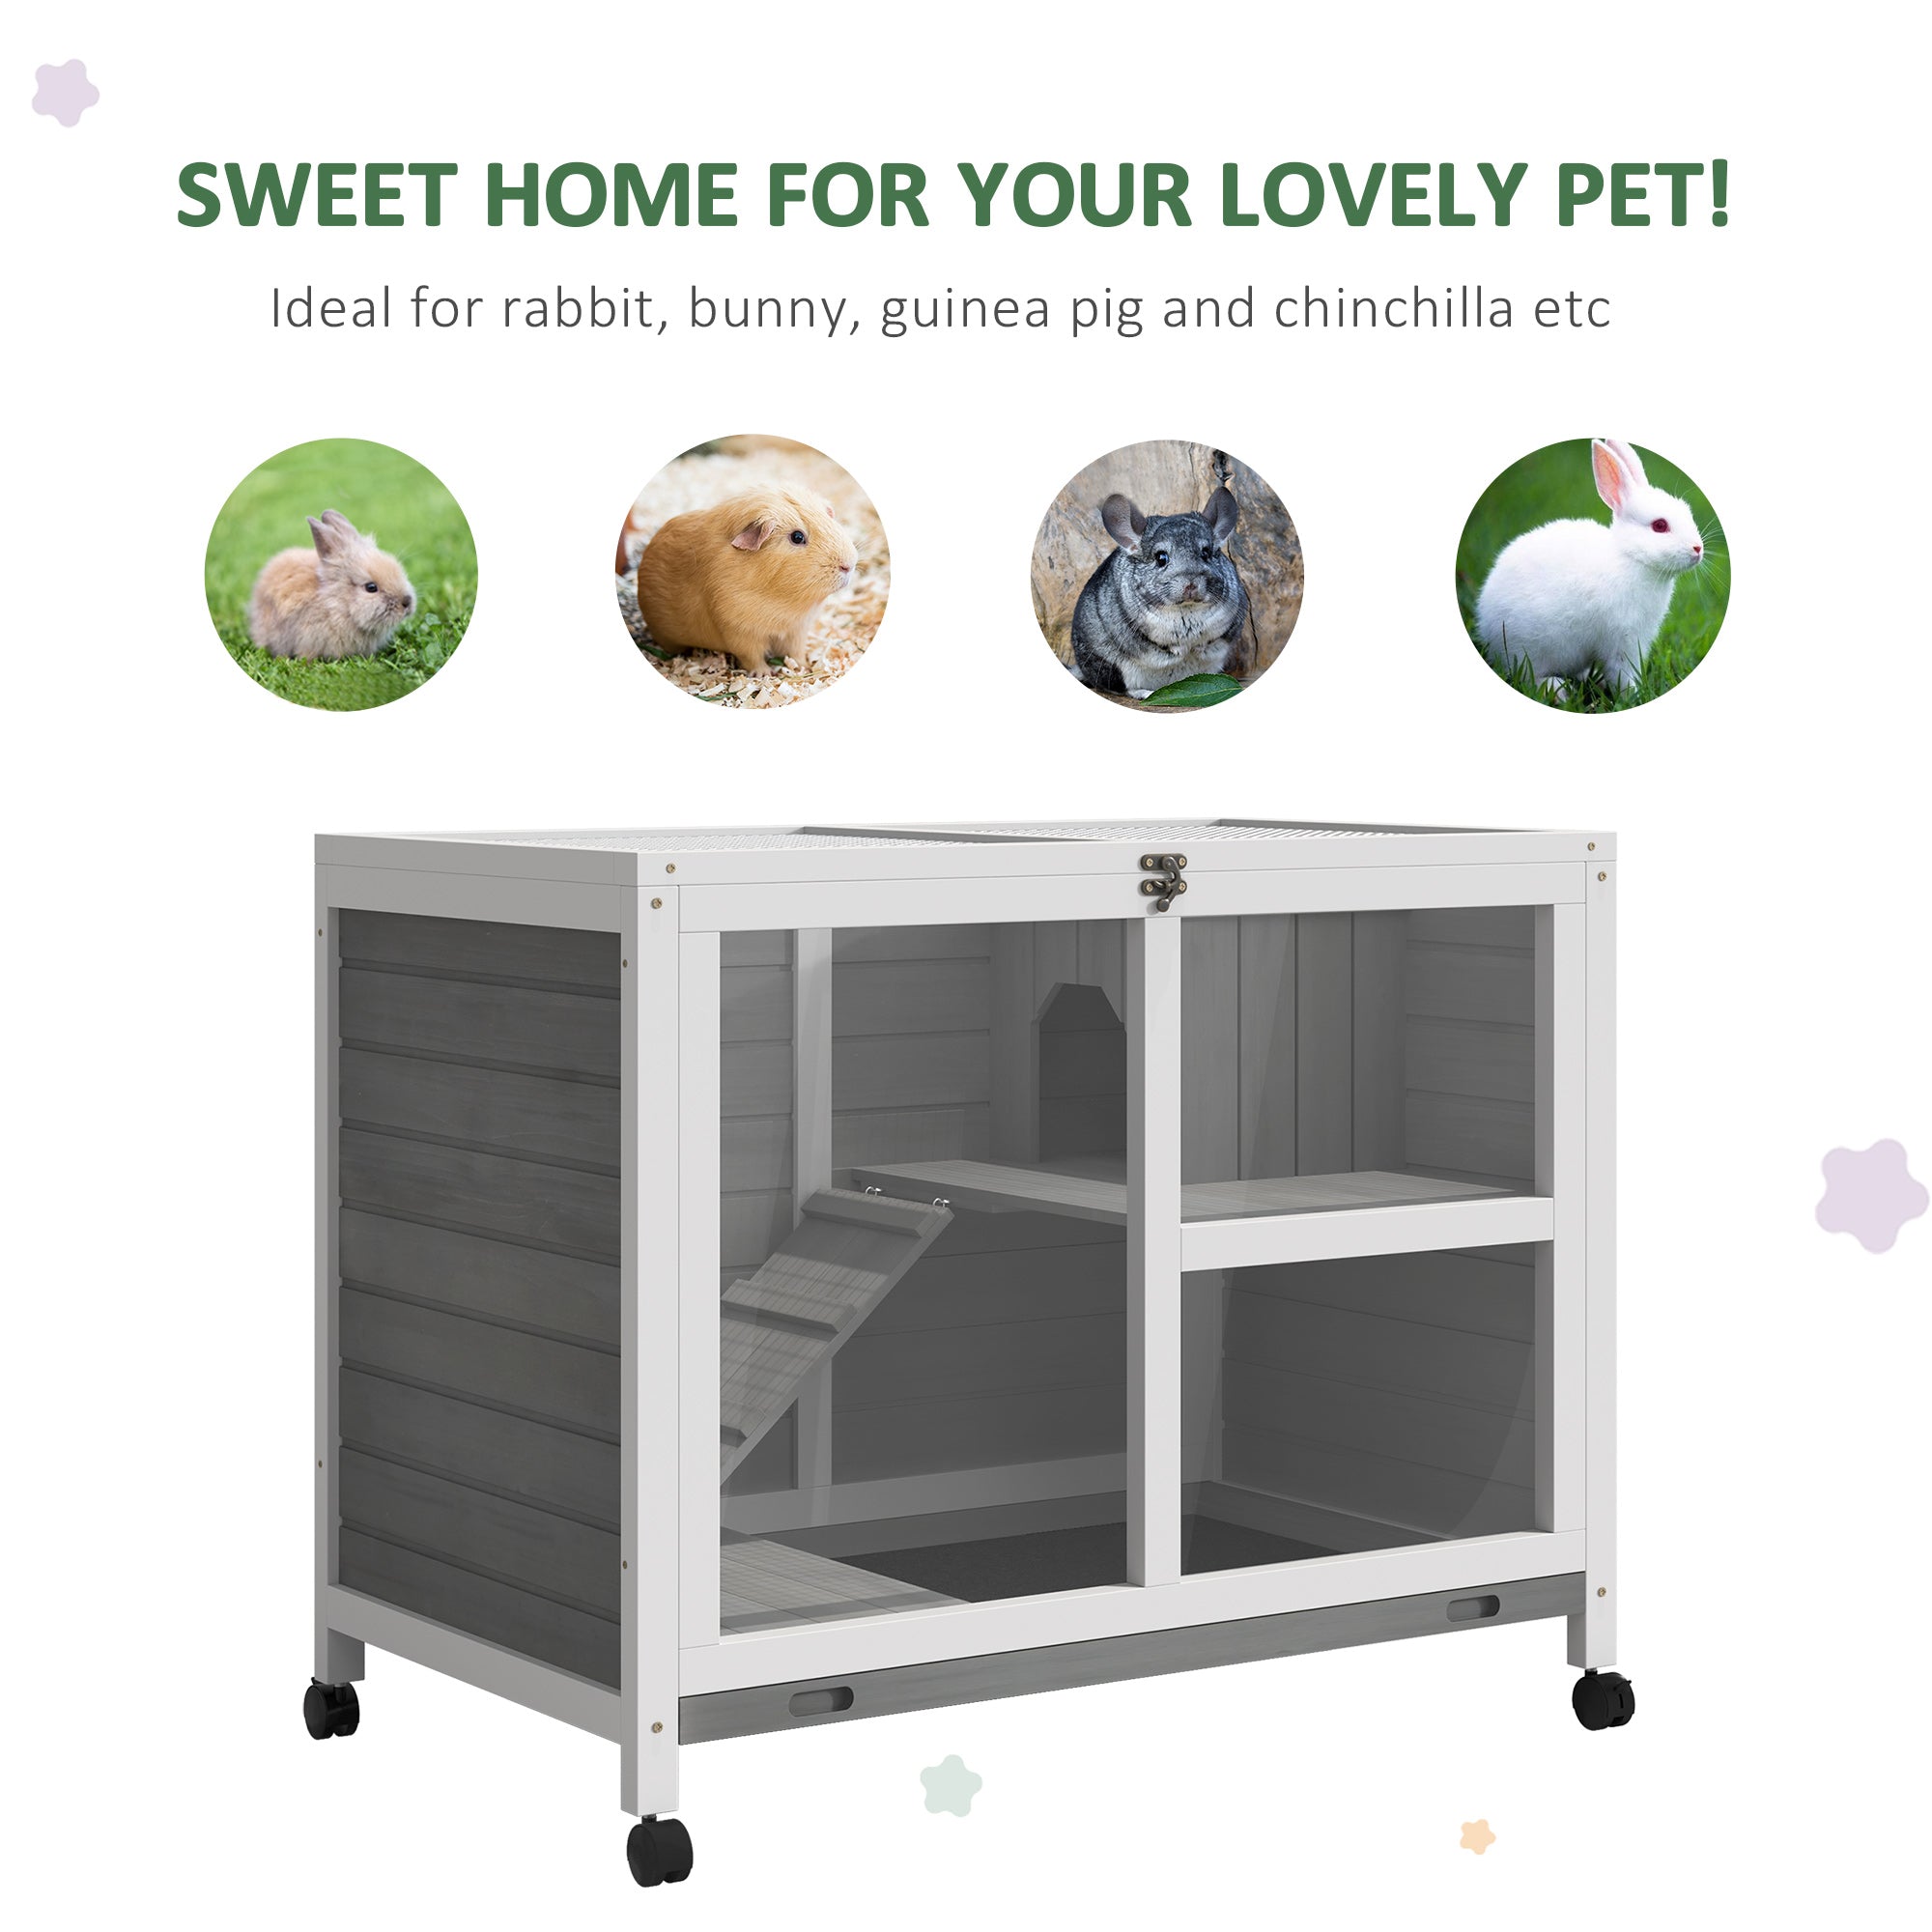 PawHut Wooden Rabbit Hutch Guinea Pigs House Bunny Small Animal Cage w/ Pull-out Tray Openable Roof Wheels 91.5 x 53.3 x 73 cm - Inspirely